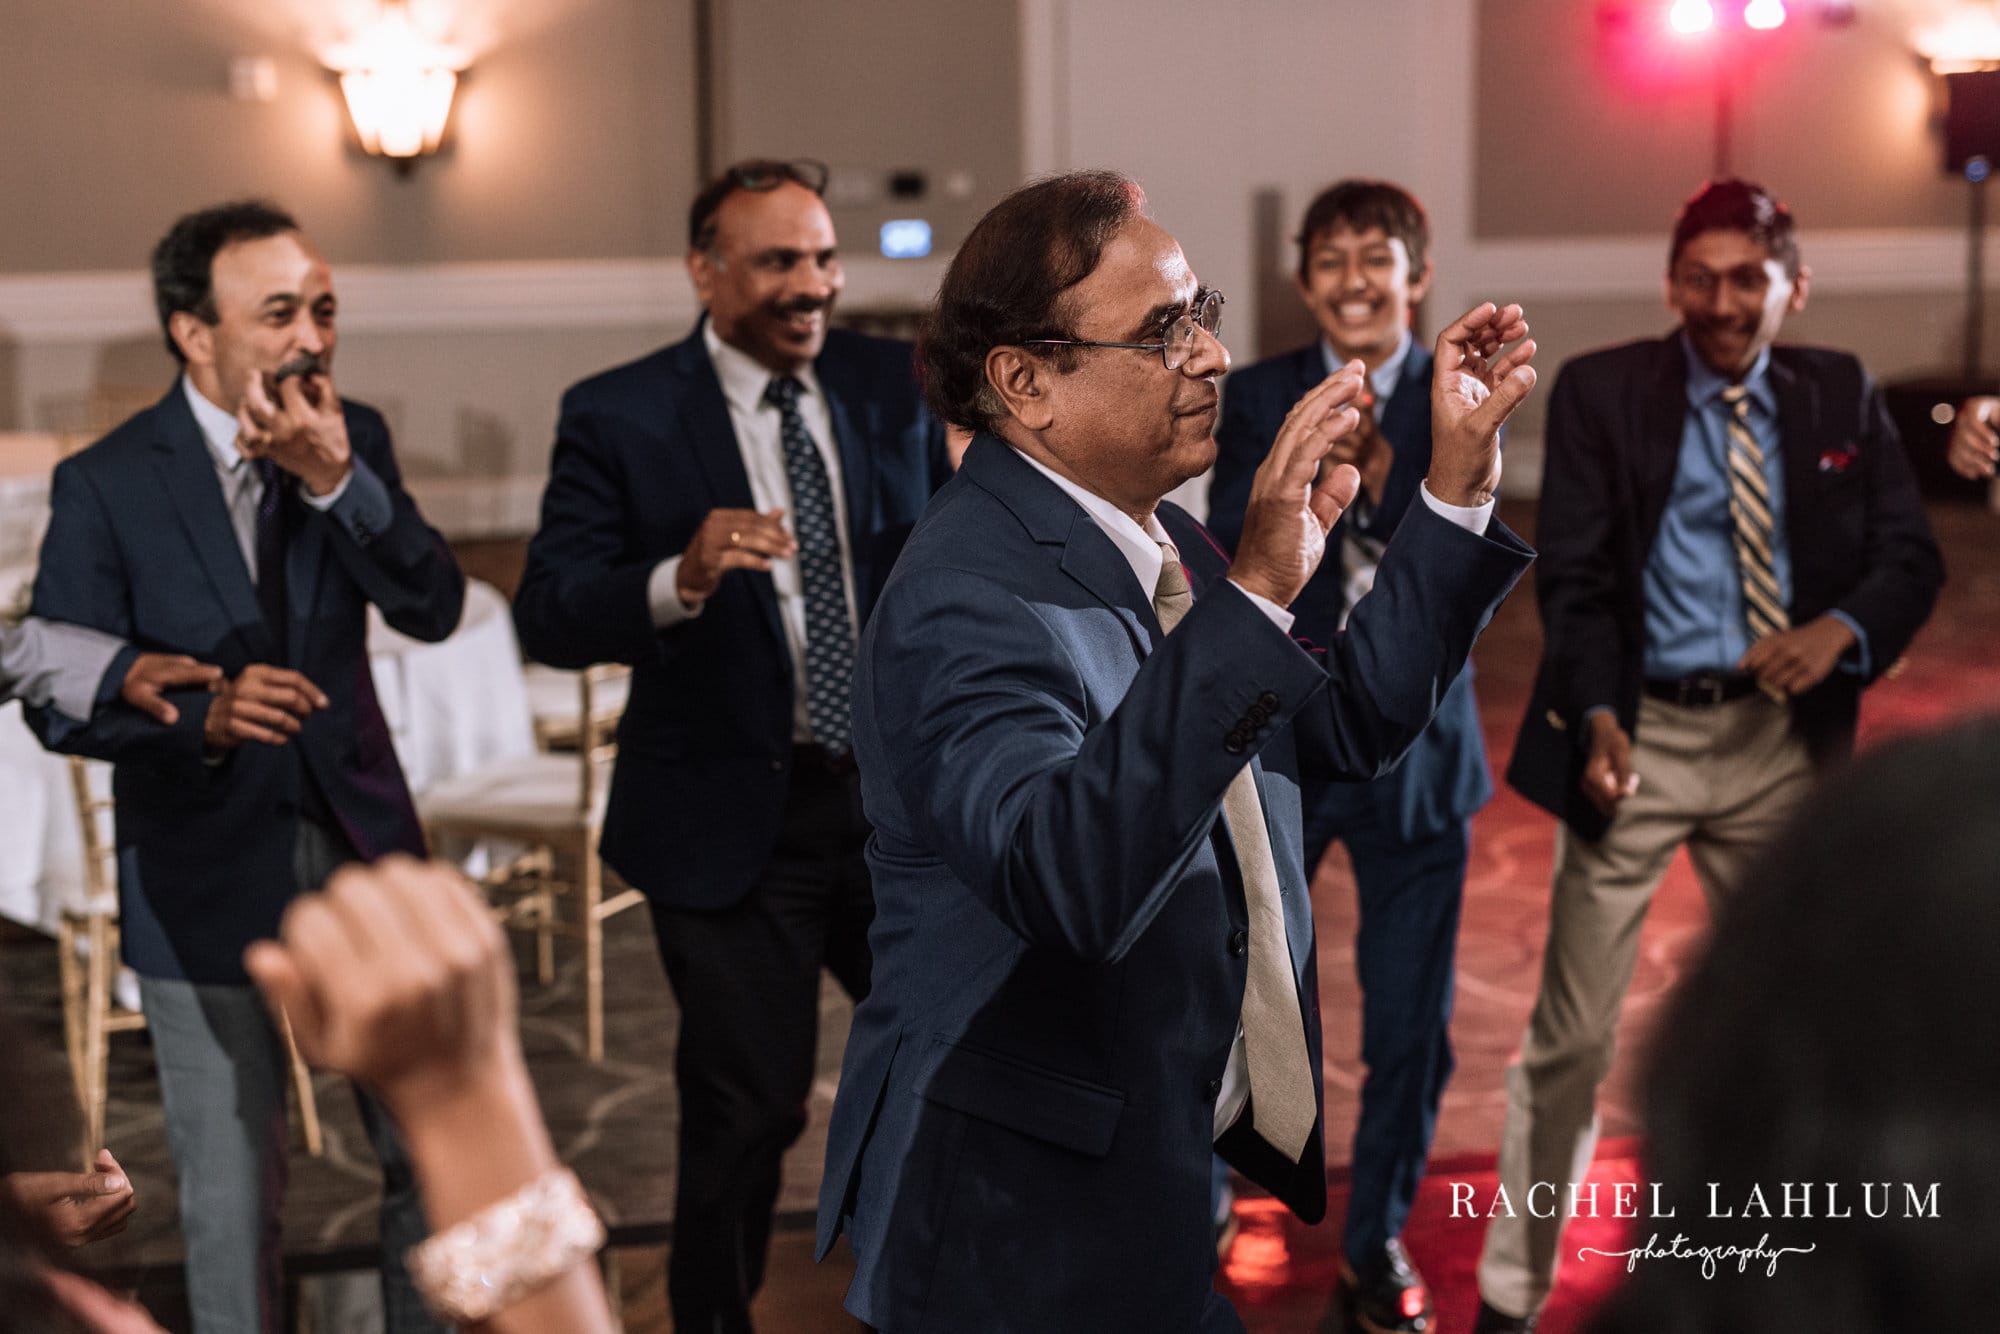 Wedding guests surround the grooms father as he dances. 